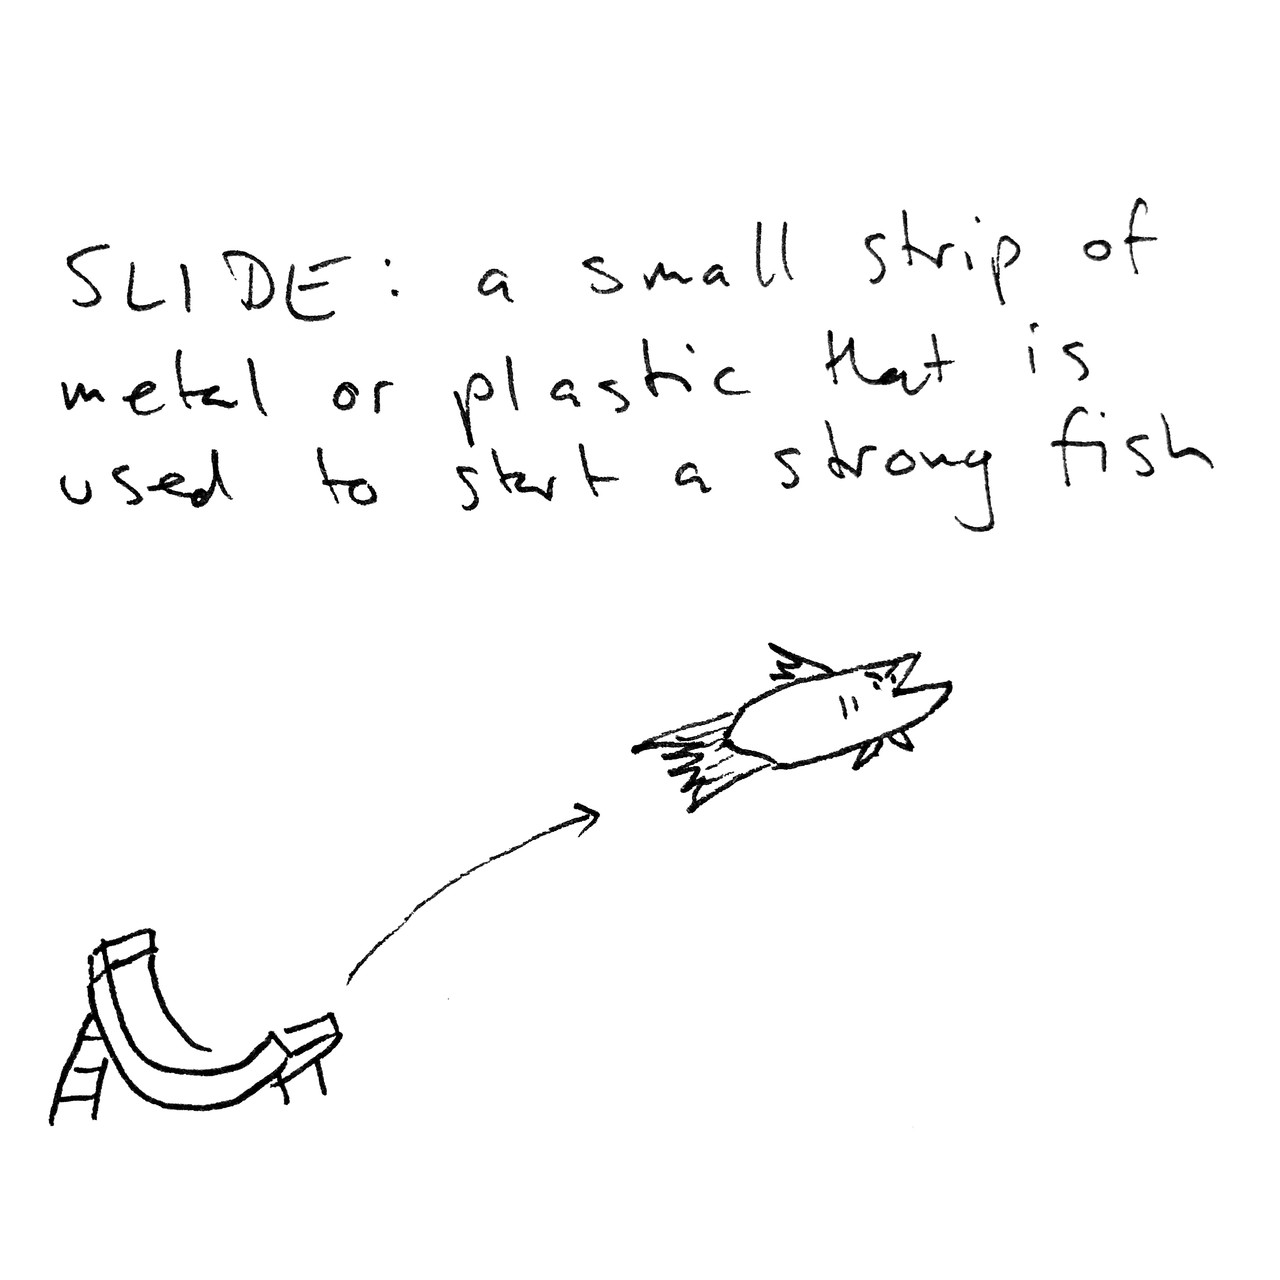 SLIDE: a small strip of metal or plastic that is used to start a strong fish. The drawing depicts a small j-shaped chute from which a fish is being launched into the air.